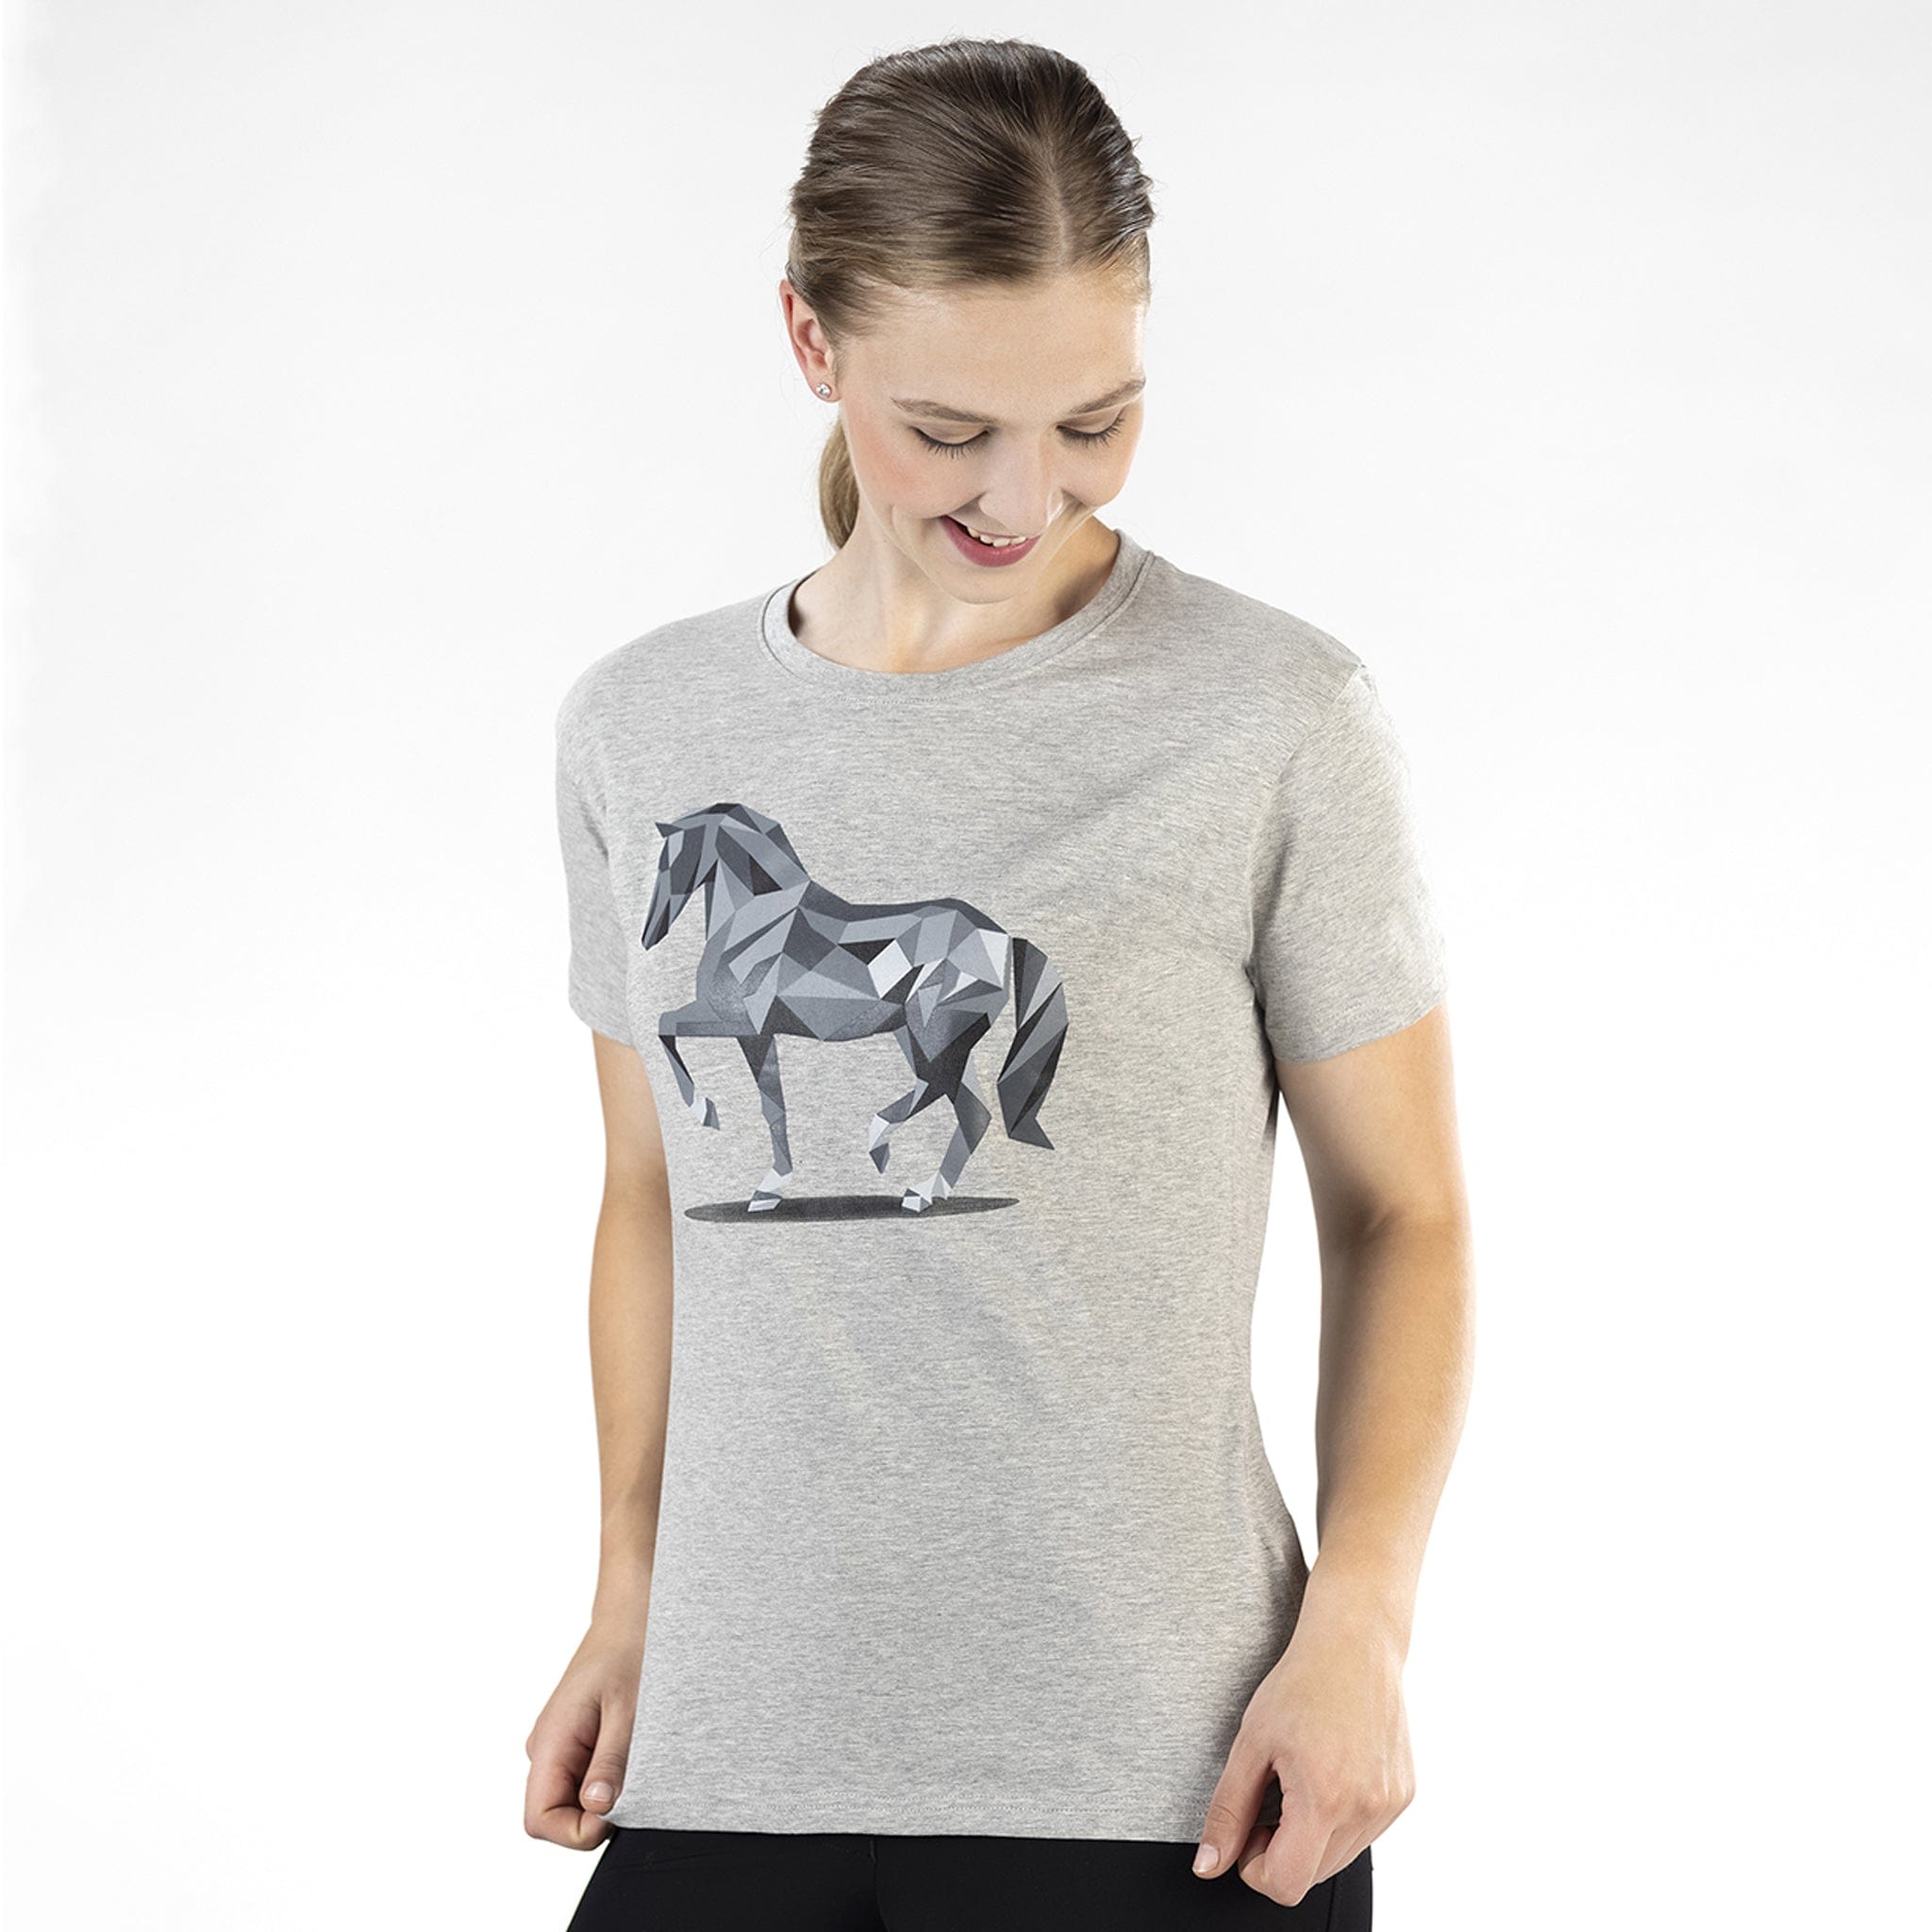 HKM Graphic Horse T-Shirt 13133 Grey Front On Model